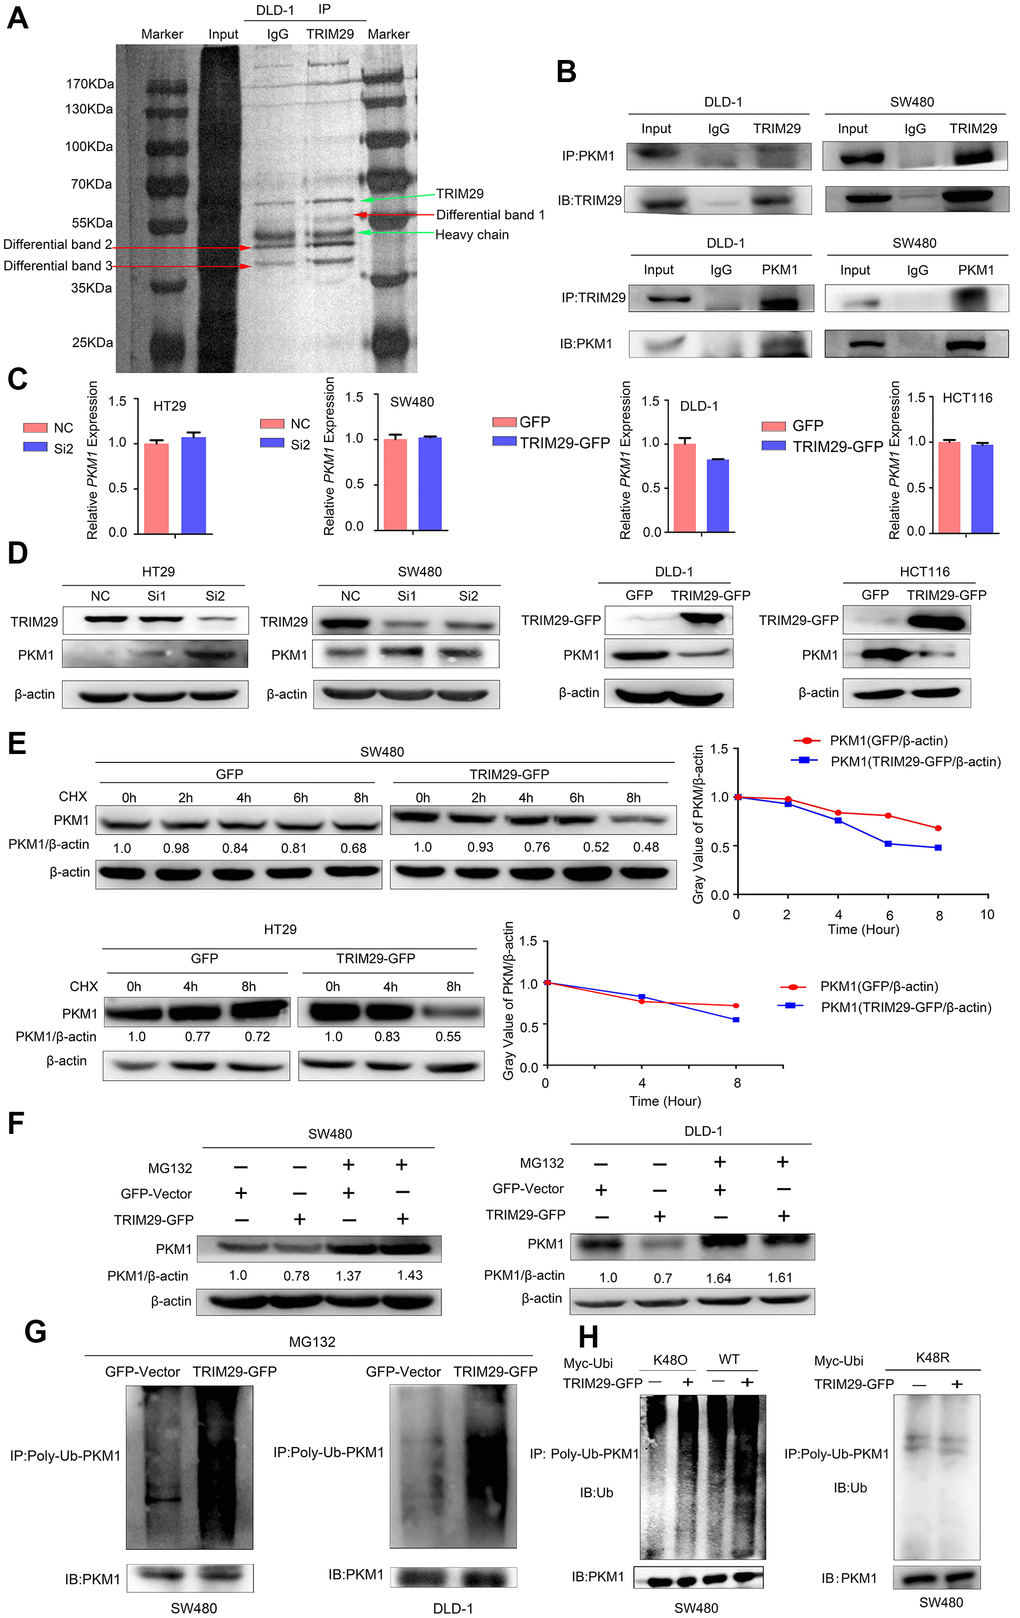 TRIM29 negatively regulates PKM1 by promoting its degradation via ubiquitination. (A) A coimmunoprecipitation (Co-IP) assay was performed to identify the proteins in DLD-1 cells that interact with TRIM29. (B) The Co-IP experiments showed that TRIM29 interacted with PKM1 in DLD-1 and SW480 cell lines. (C, D) qPCR and Western blotting were used to measure the mRNA and protein expression levels of PKM1 after overexpressing and knocking down TRIM29. (E) Cells were transfected with vector and TRIM29 plasmid and followed by 100 μM cycloheximide (CHX). The expression levels of PKM1 were examined by Western blotting every 2 h in SW480 cells and every 4 h in DLD-1 cells. The degradation rate of PKM1 is shown in the right chart. (F–G) Cells were transfected with vector or TRIM29 plasmid for 36 h and treated with 10 μM MG132 (a proteasome inhibitor) for an additional 12 h. (F) PKM1 protein levels were examined in SW480 and DLD-1 cells. (G) Co-IP assays were performed. The levels of polyubiquitinated (Poly-Ub) PKM1 proteins was examined by Western blot with anti-ubiquitin antibody in SW480 and DLD-1 cells. (H) The levels of wild type, K48O and K48R polyubiquitinated (Poly-Ub) PKM1 proteins was examined by Western blot with anti-ubiquitin antibody in SW480 cells. The statistical analysis was performed using Kendal’s tau-b test. *P P P 